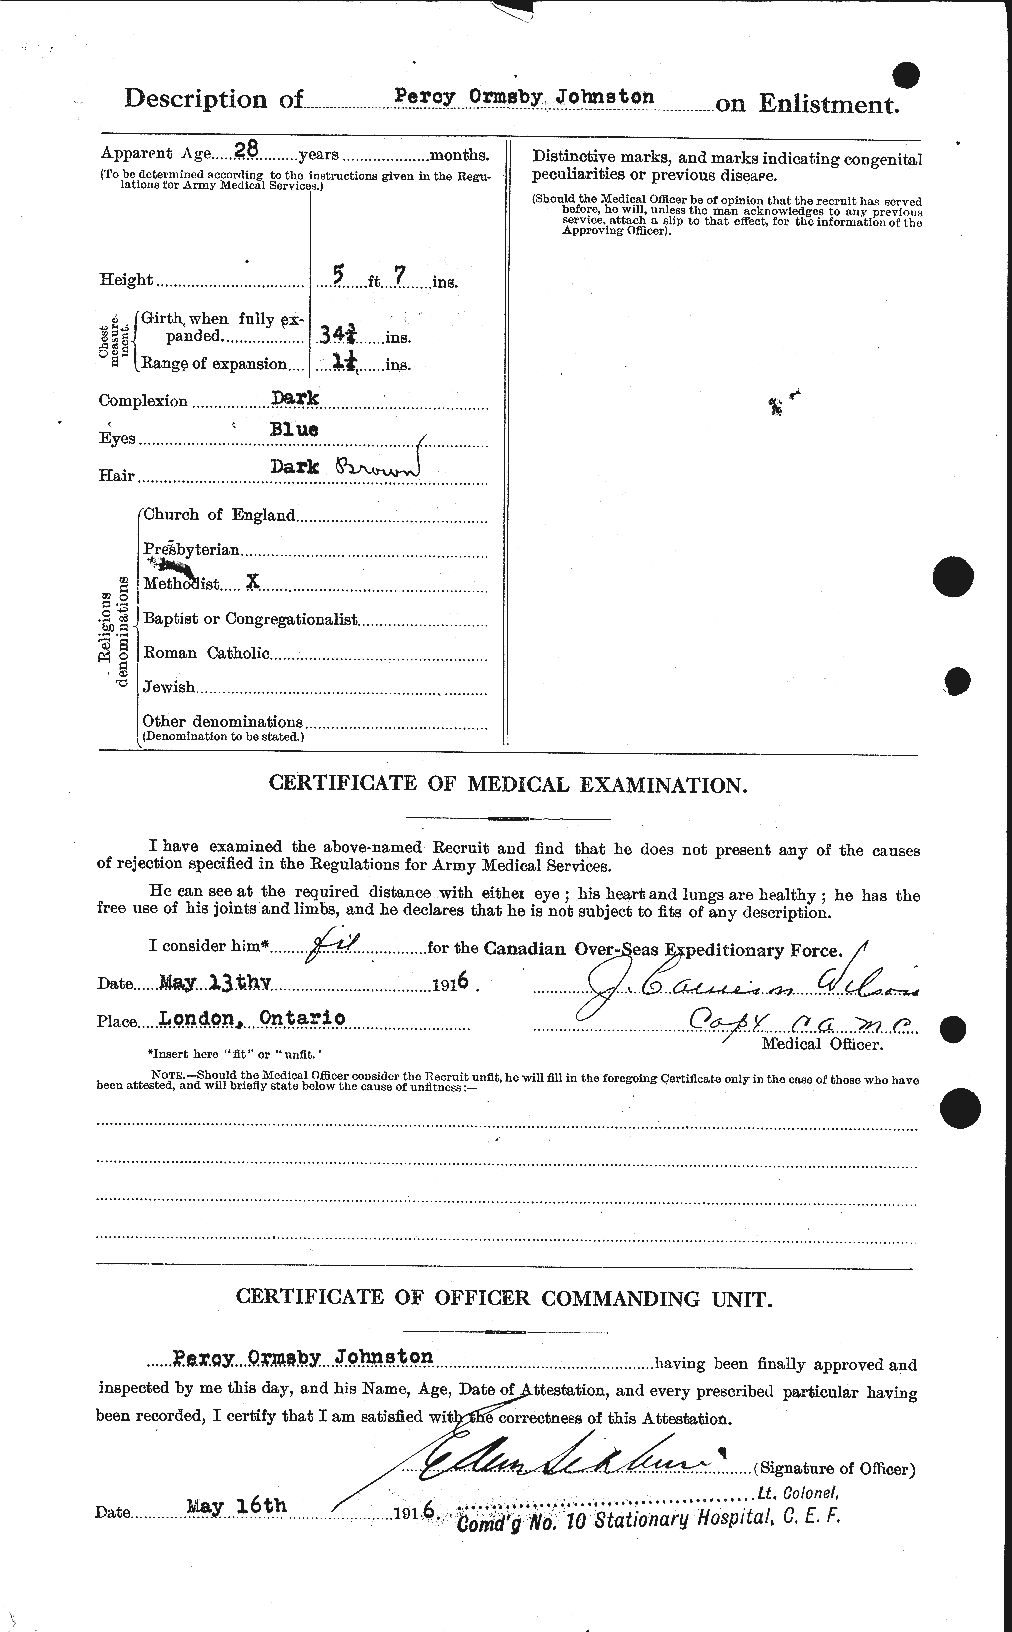 Personnel Records of the First World War - CEF 423032b